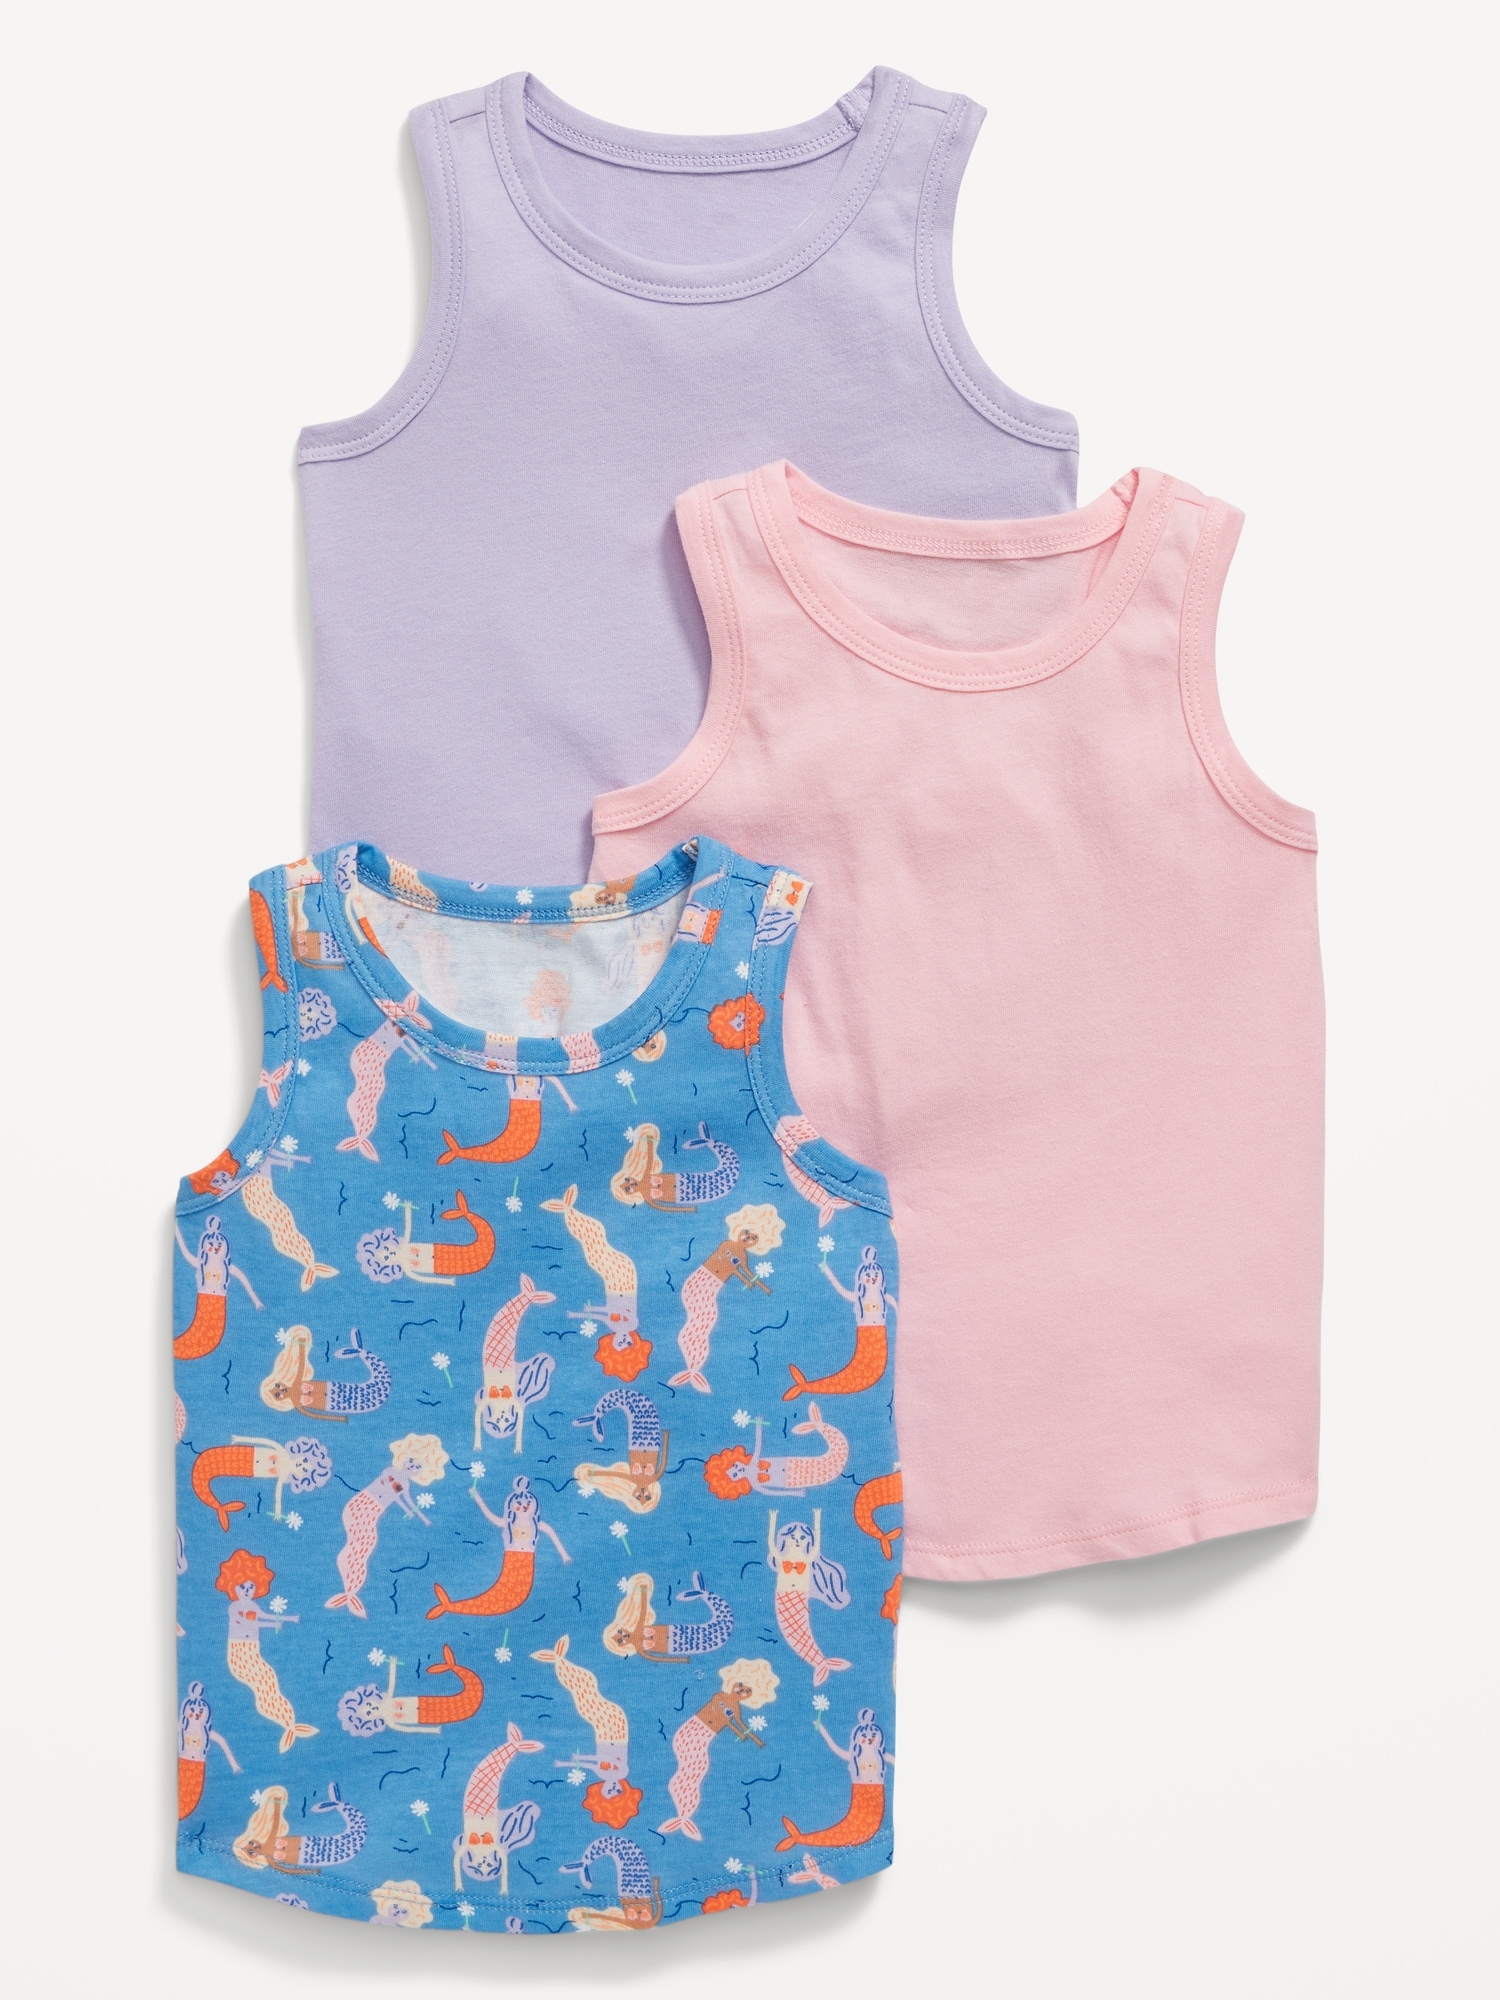 Tank Top 3-Pack for Toddler Girls